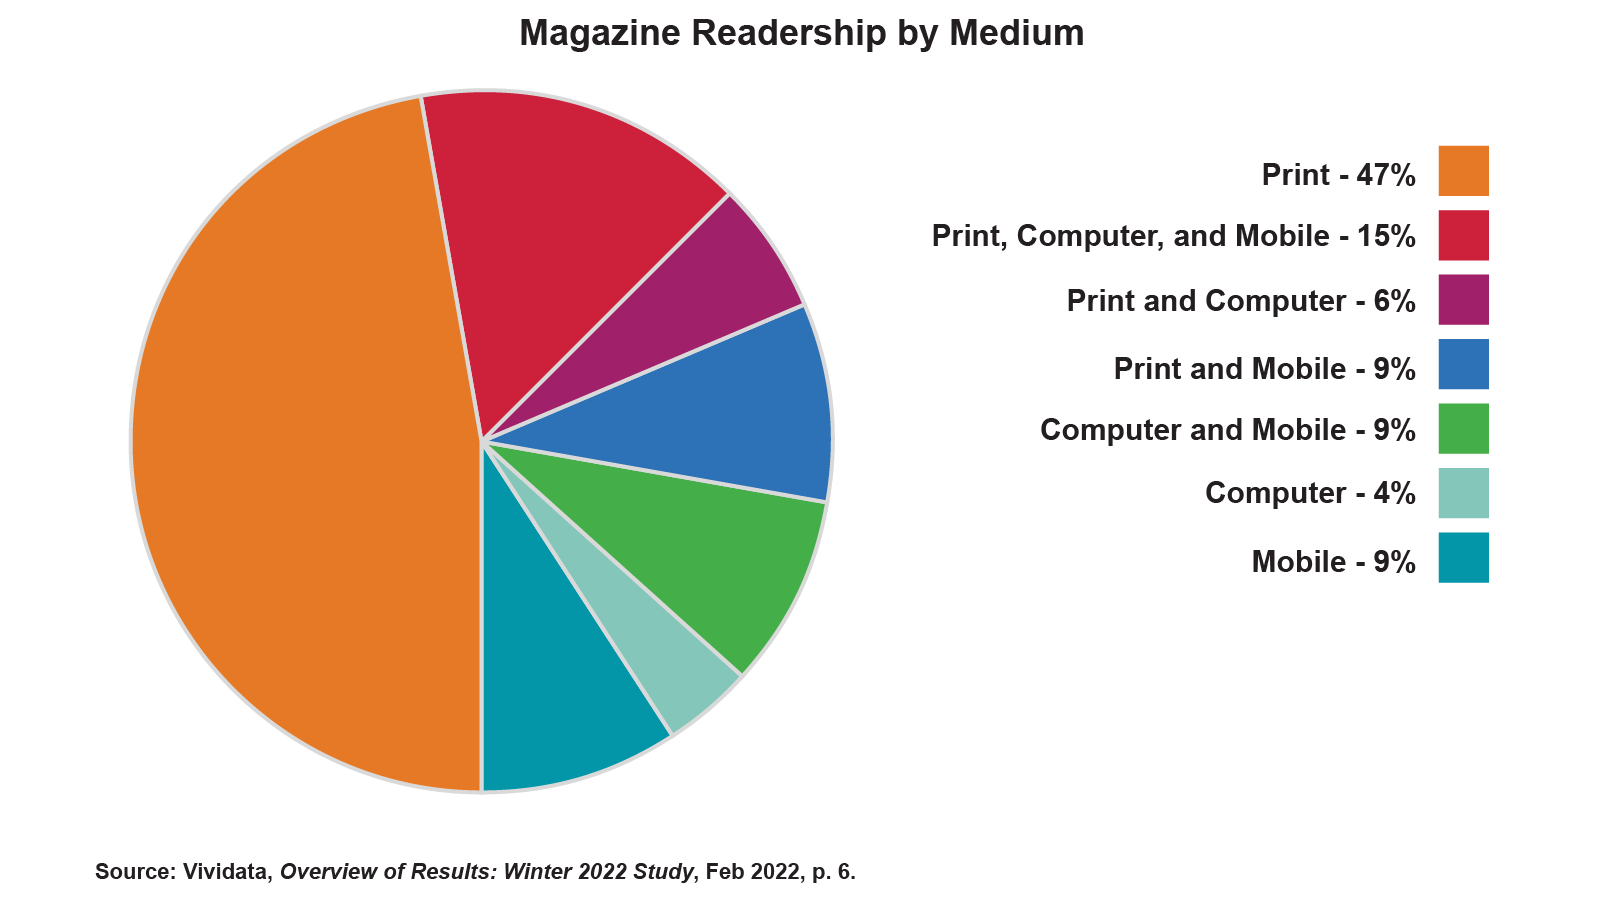 A pie chart showing magazine readership by medium, with categories for print, computer, mobile, and all combinations of multiple media. By far the highest percentage is attributable to print, followed by all three in combination.